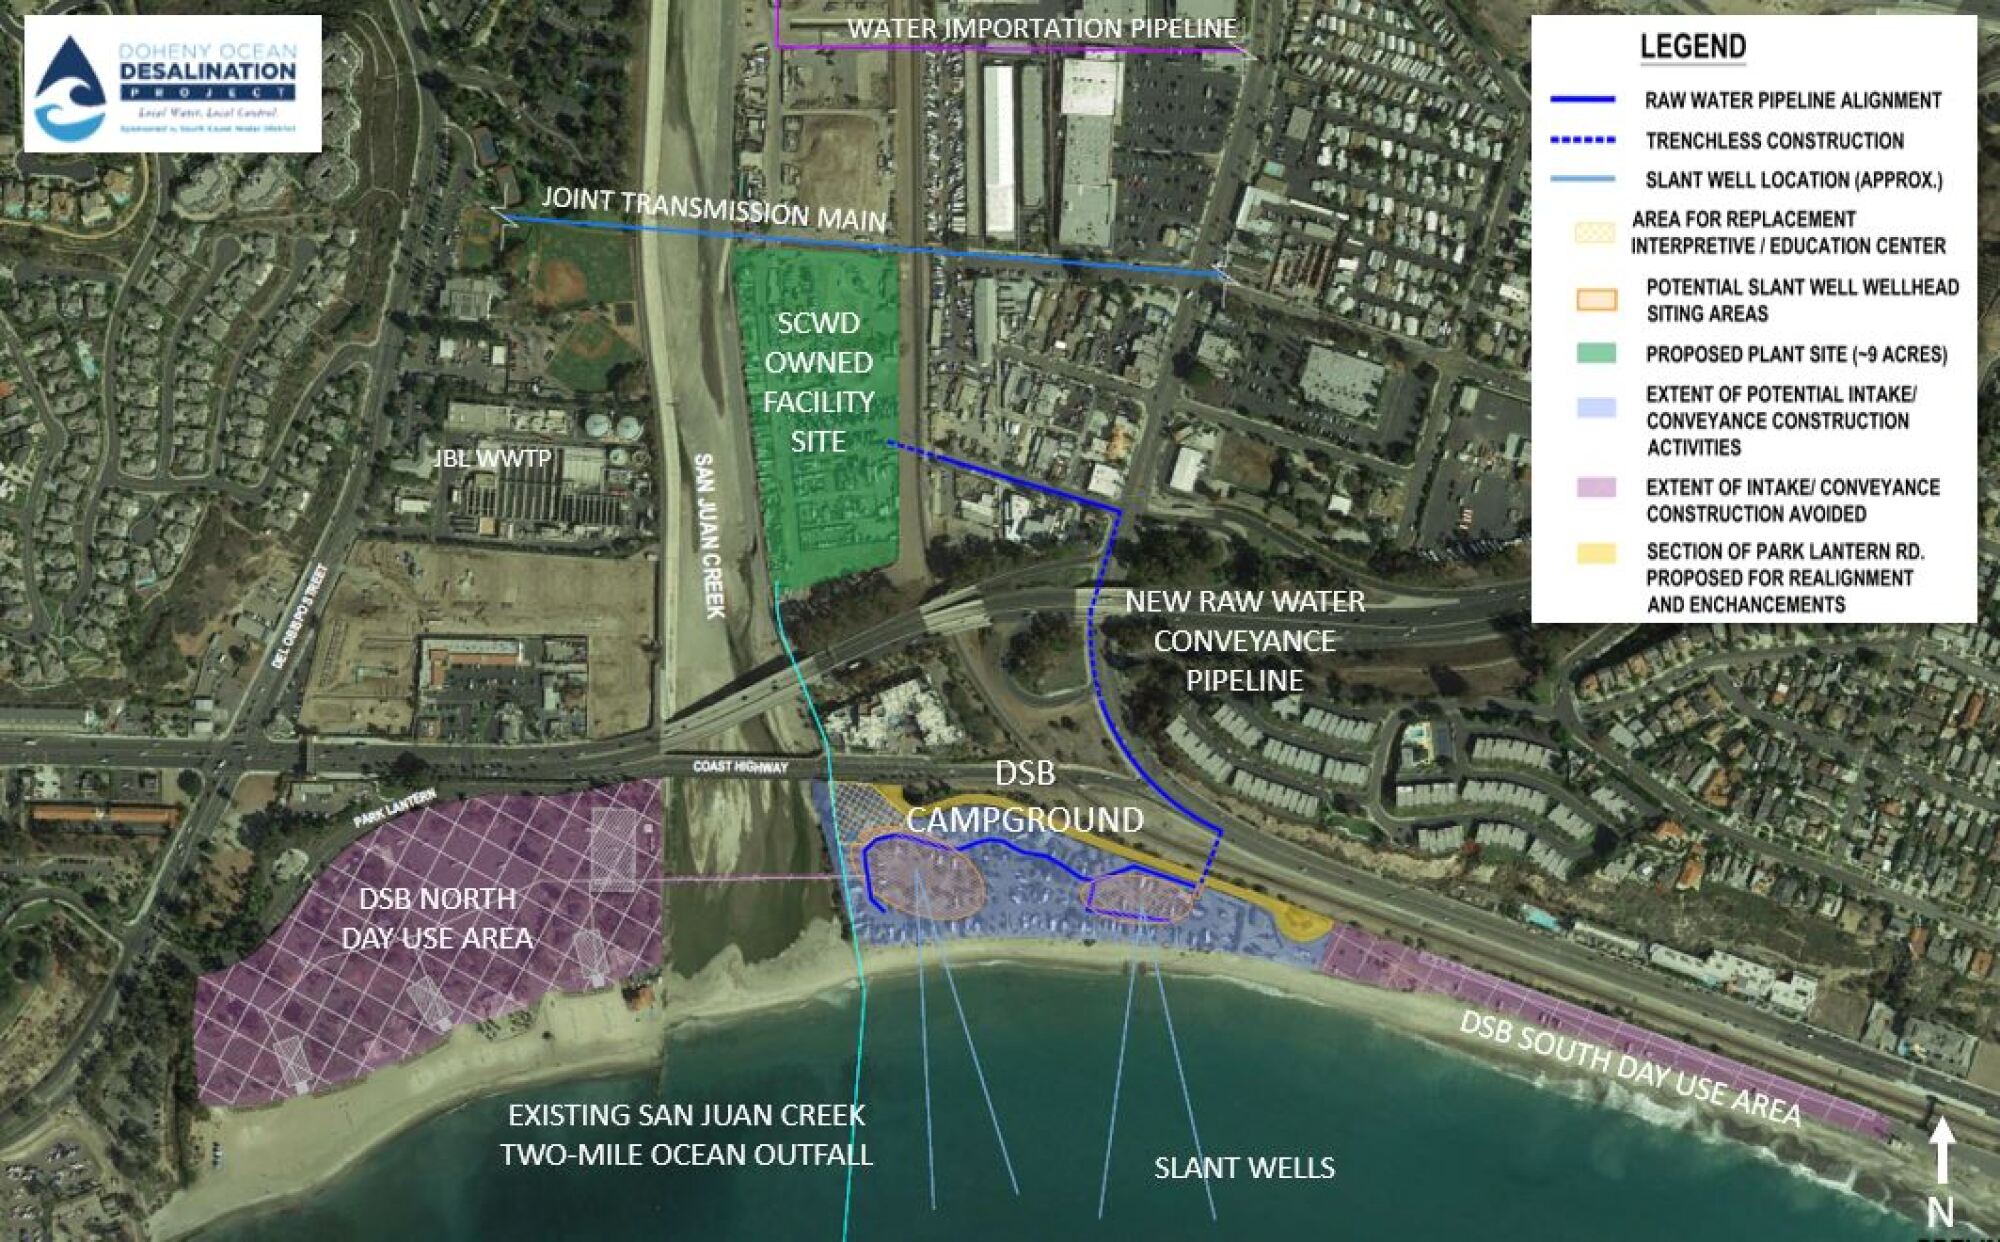 A site map for the proposed Doheny desalination plant shows how pipelines will travel from the ocean to the facility.